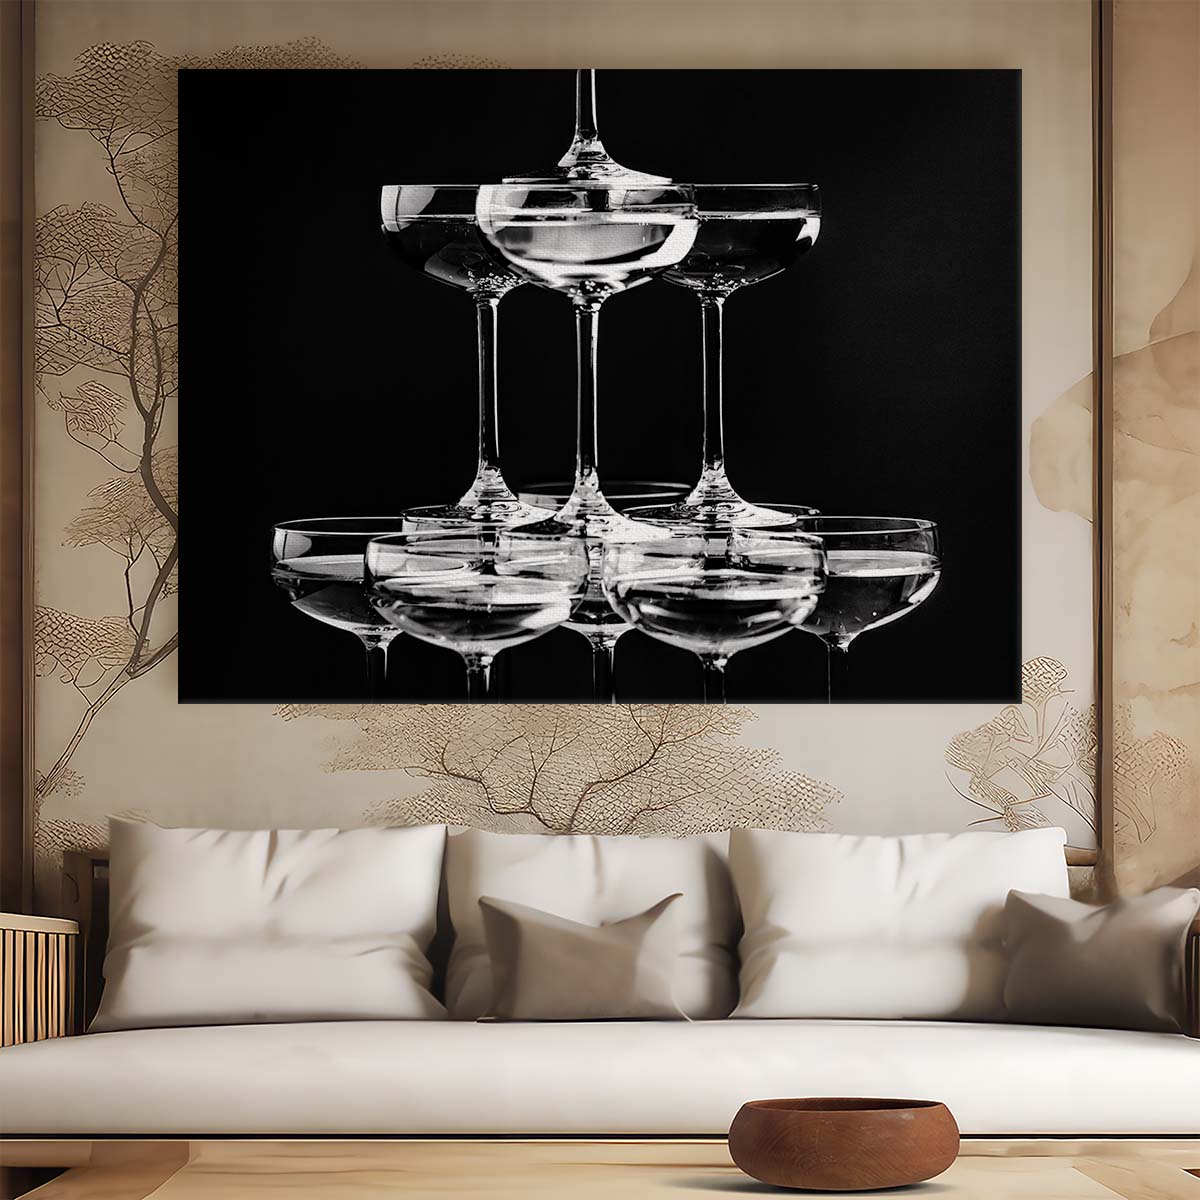 Elegant Champagne Tower Celebration Monochrome Wall Art by Luxuriance Designs. Made in USA.